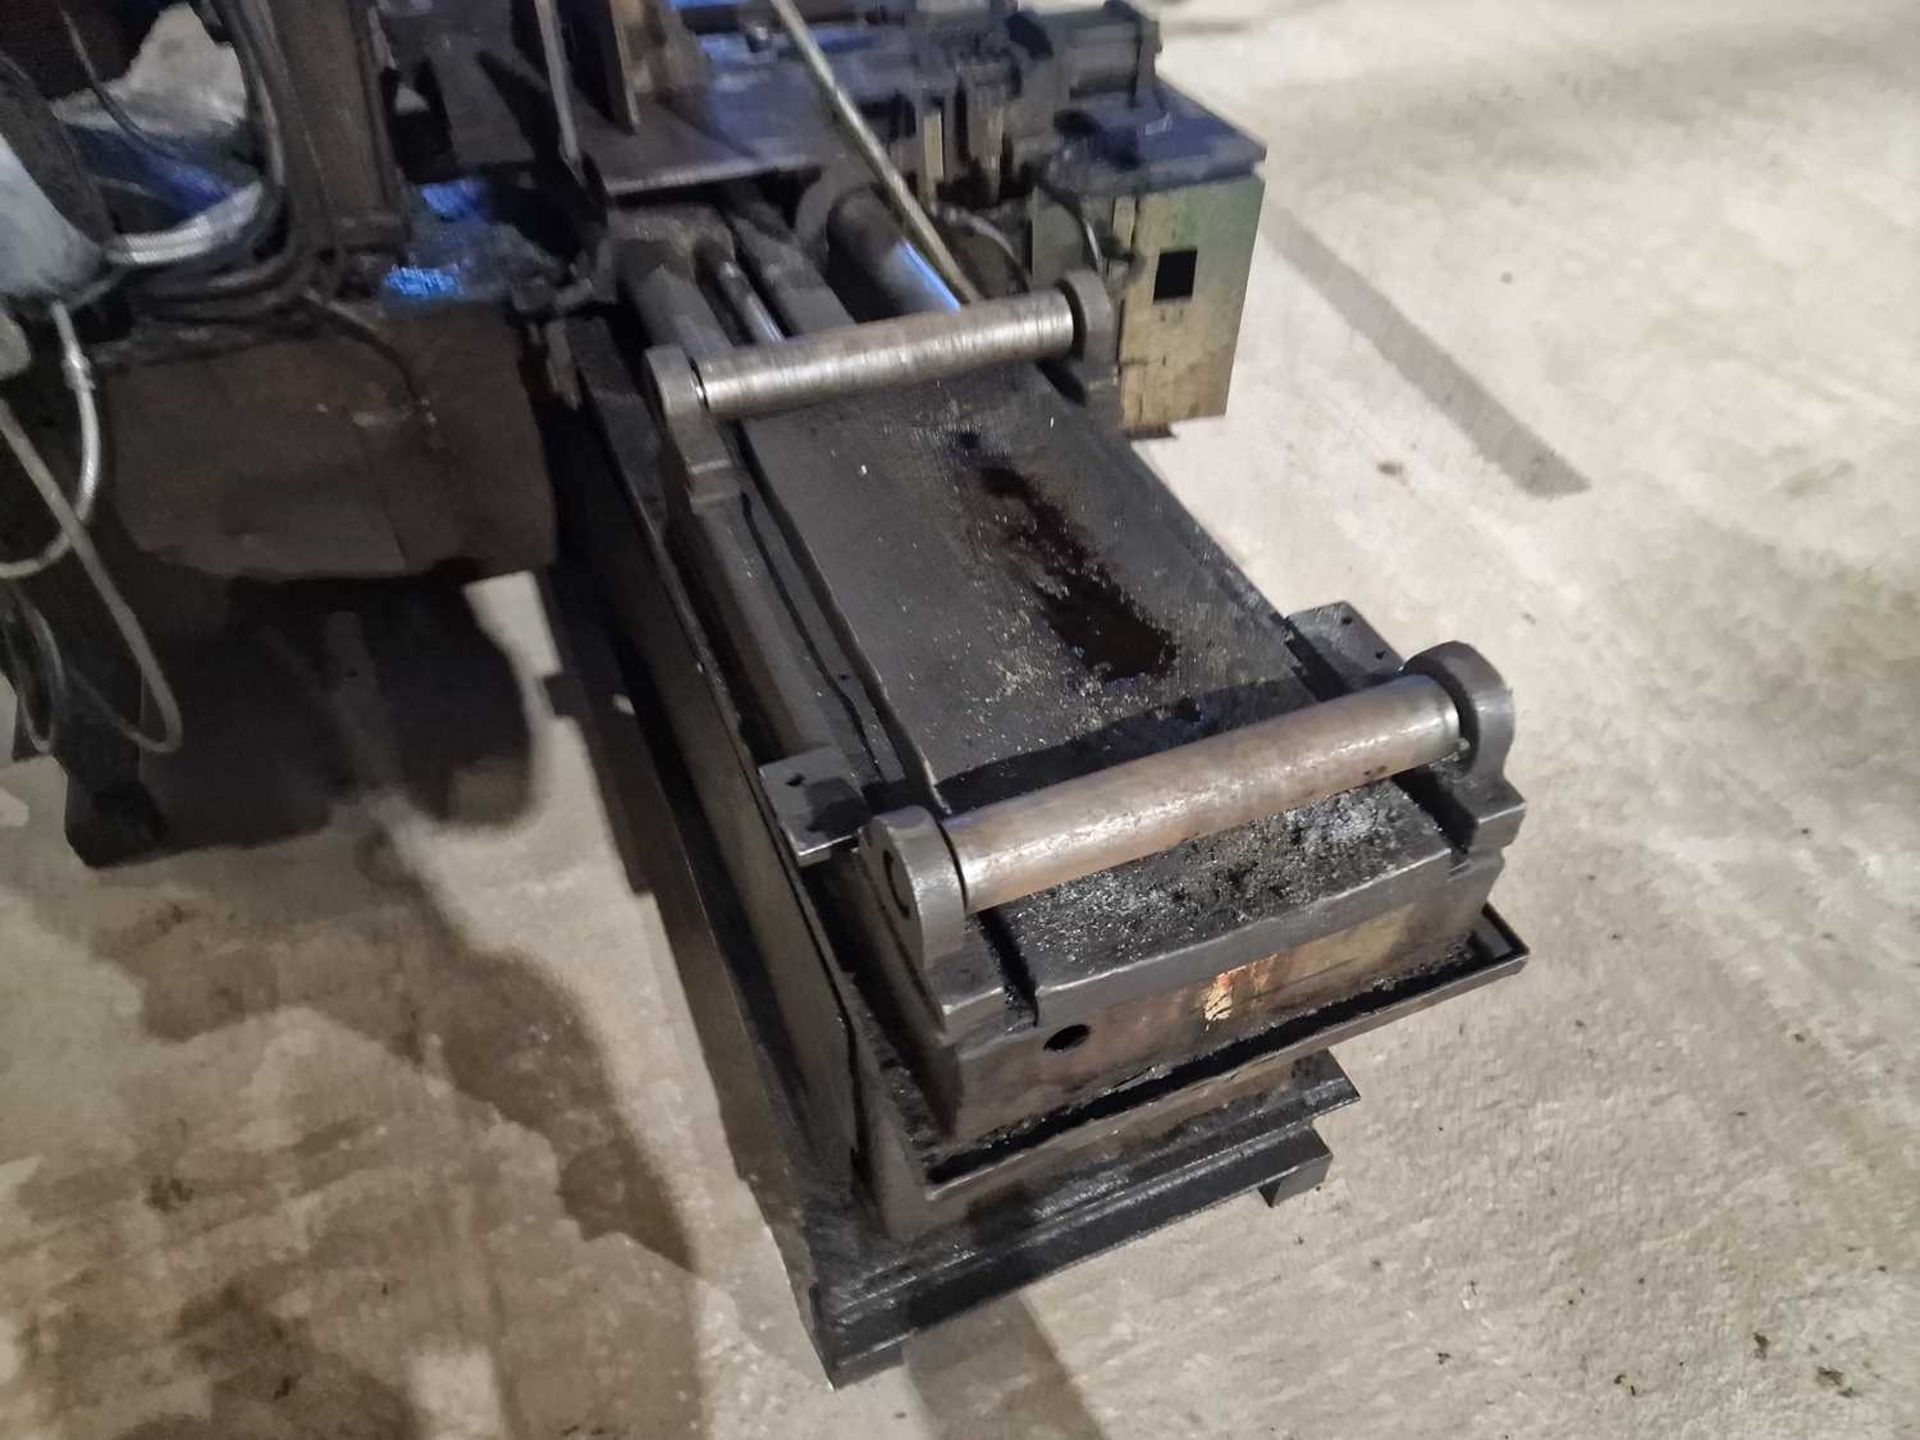 1989 Amada Cutmaster HA-250 415 Volt Band Saw (BEING SOLD FROM PICS) - Image 5 of 12